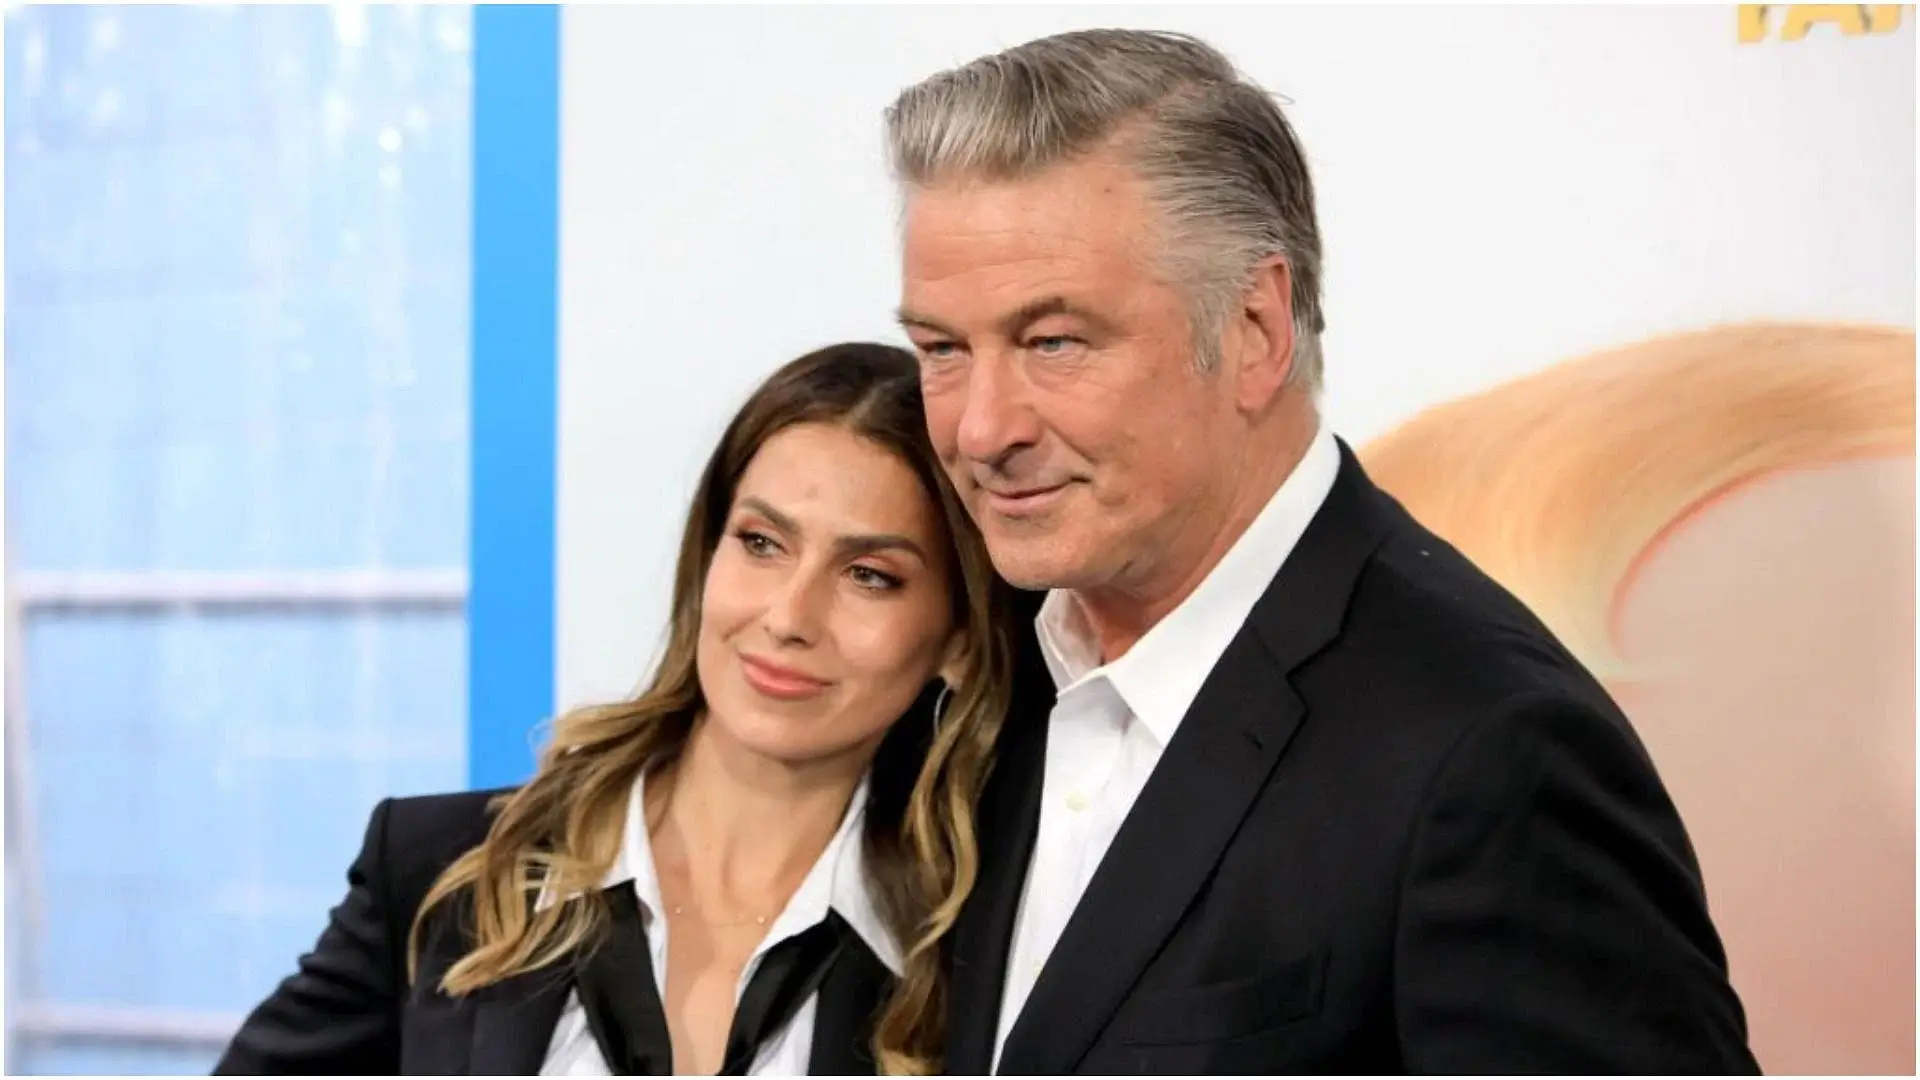 Hilaria Baldwin broke her silence on her iHeartRadio podcast to thank Alec Baldwin's fans